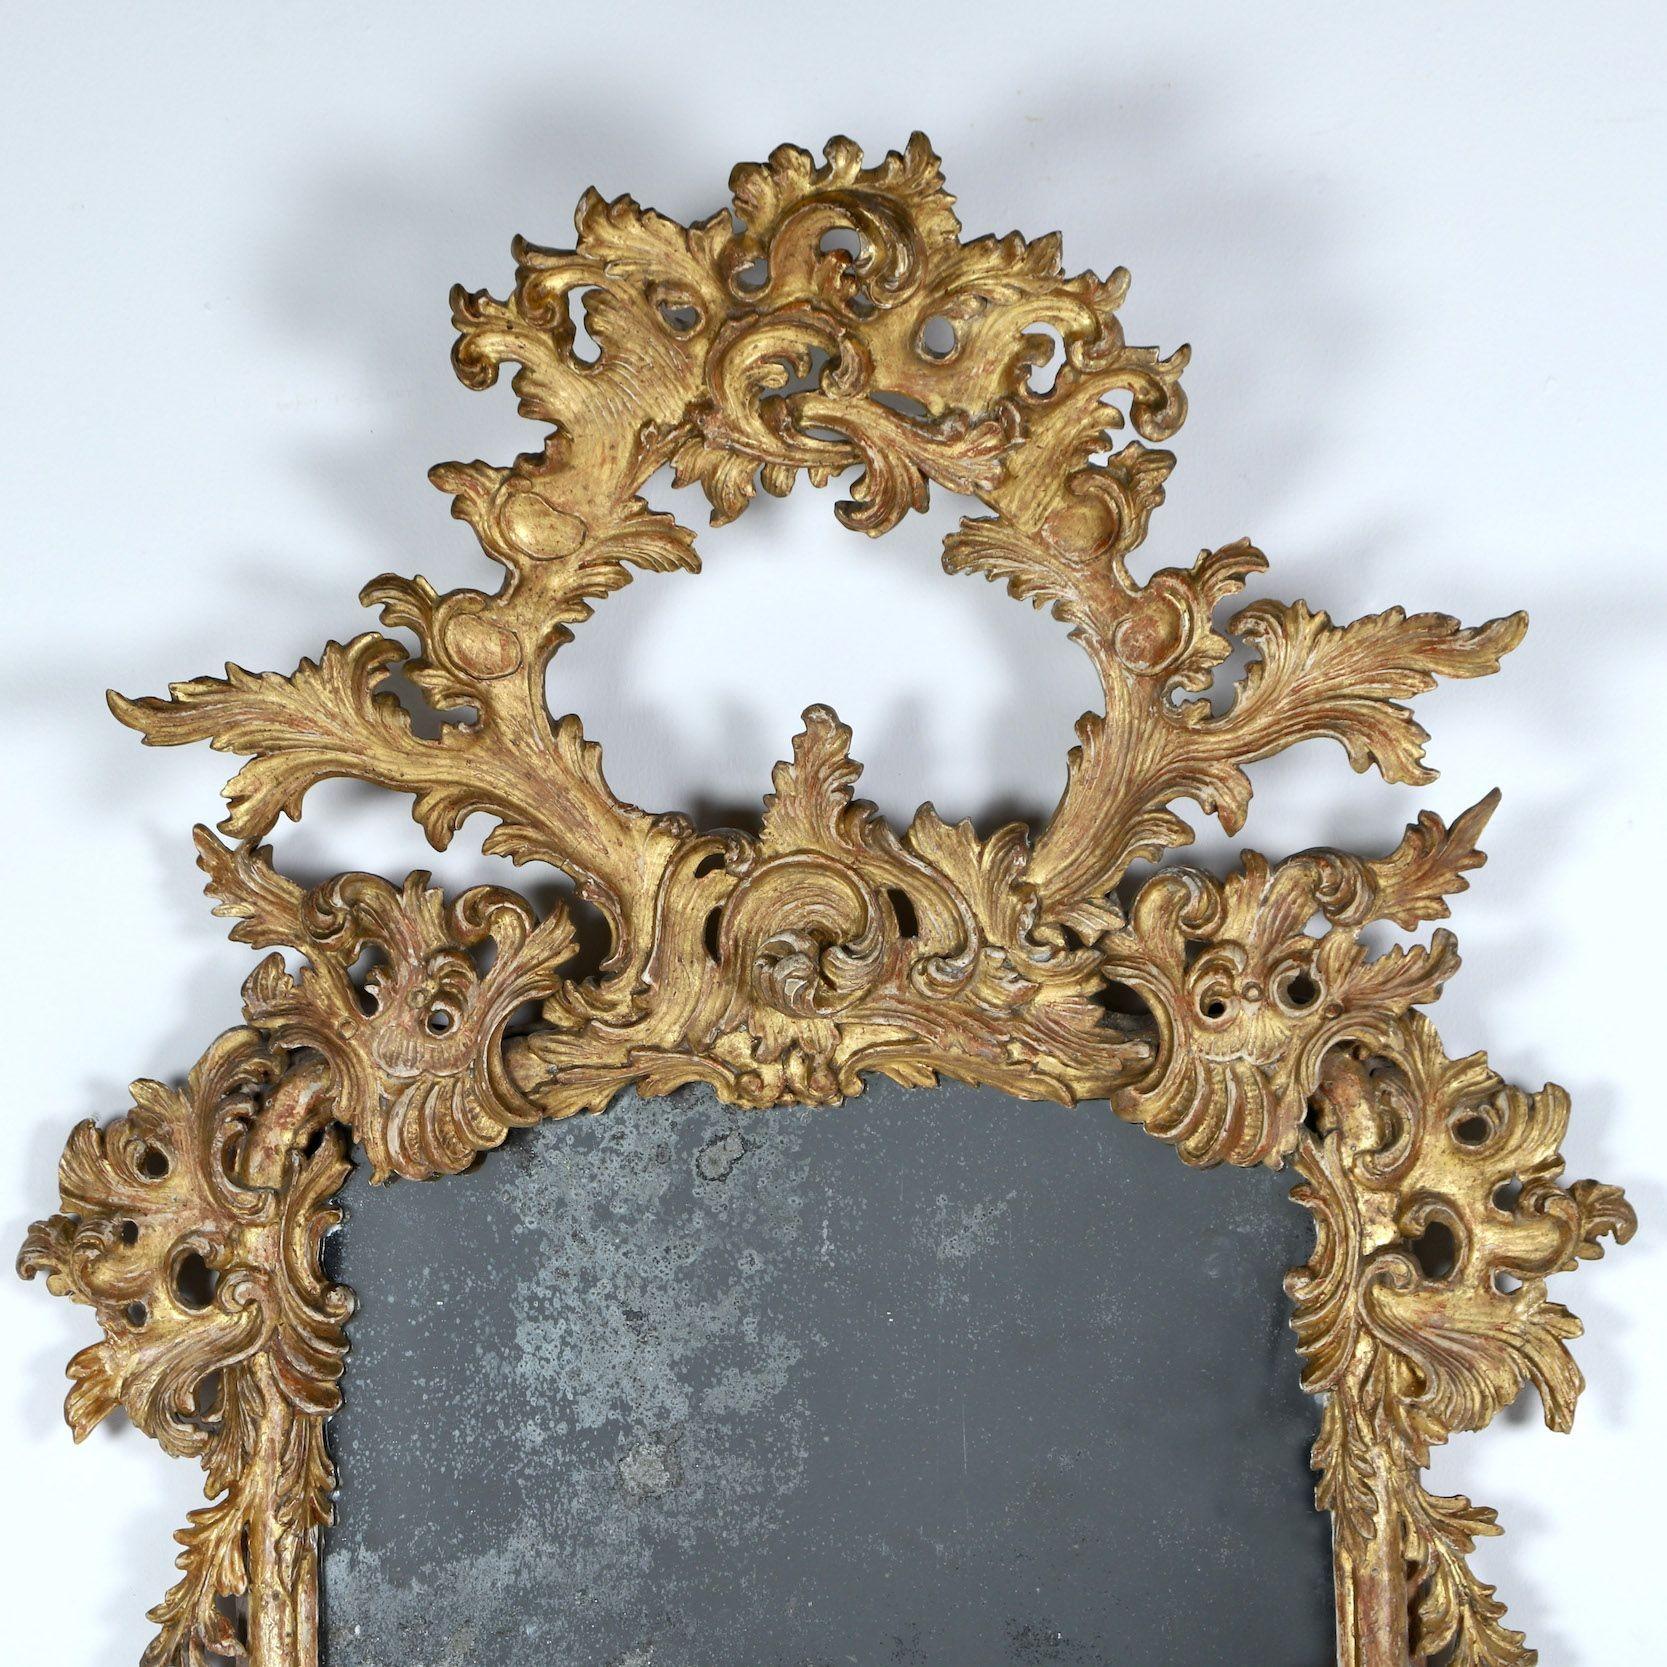 Hand-Carved 19th c. Italian Rococo Giltwood Mirror with Original Mirror Plate For Sale